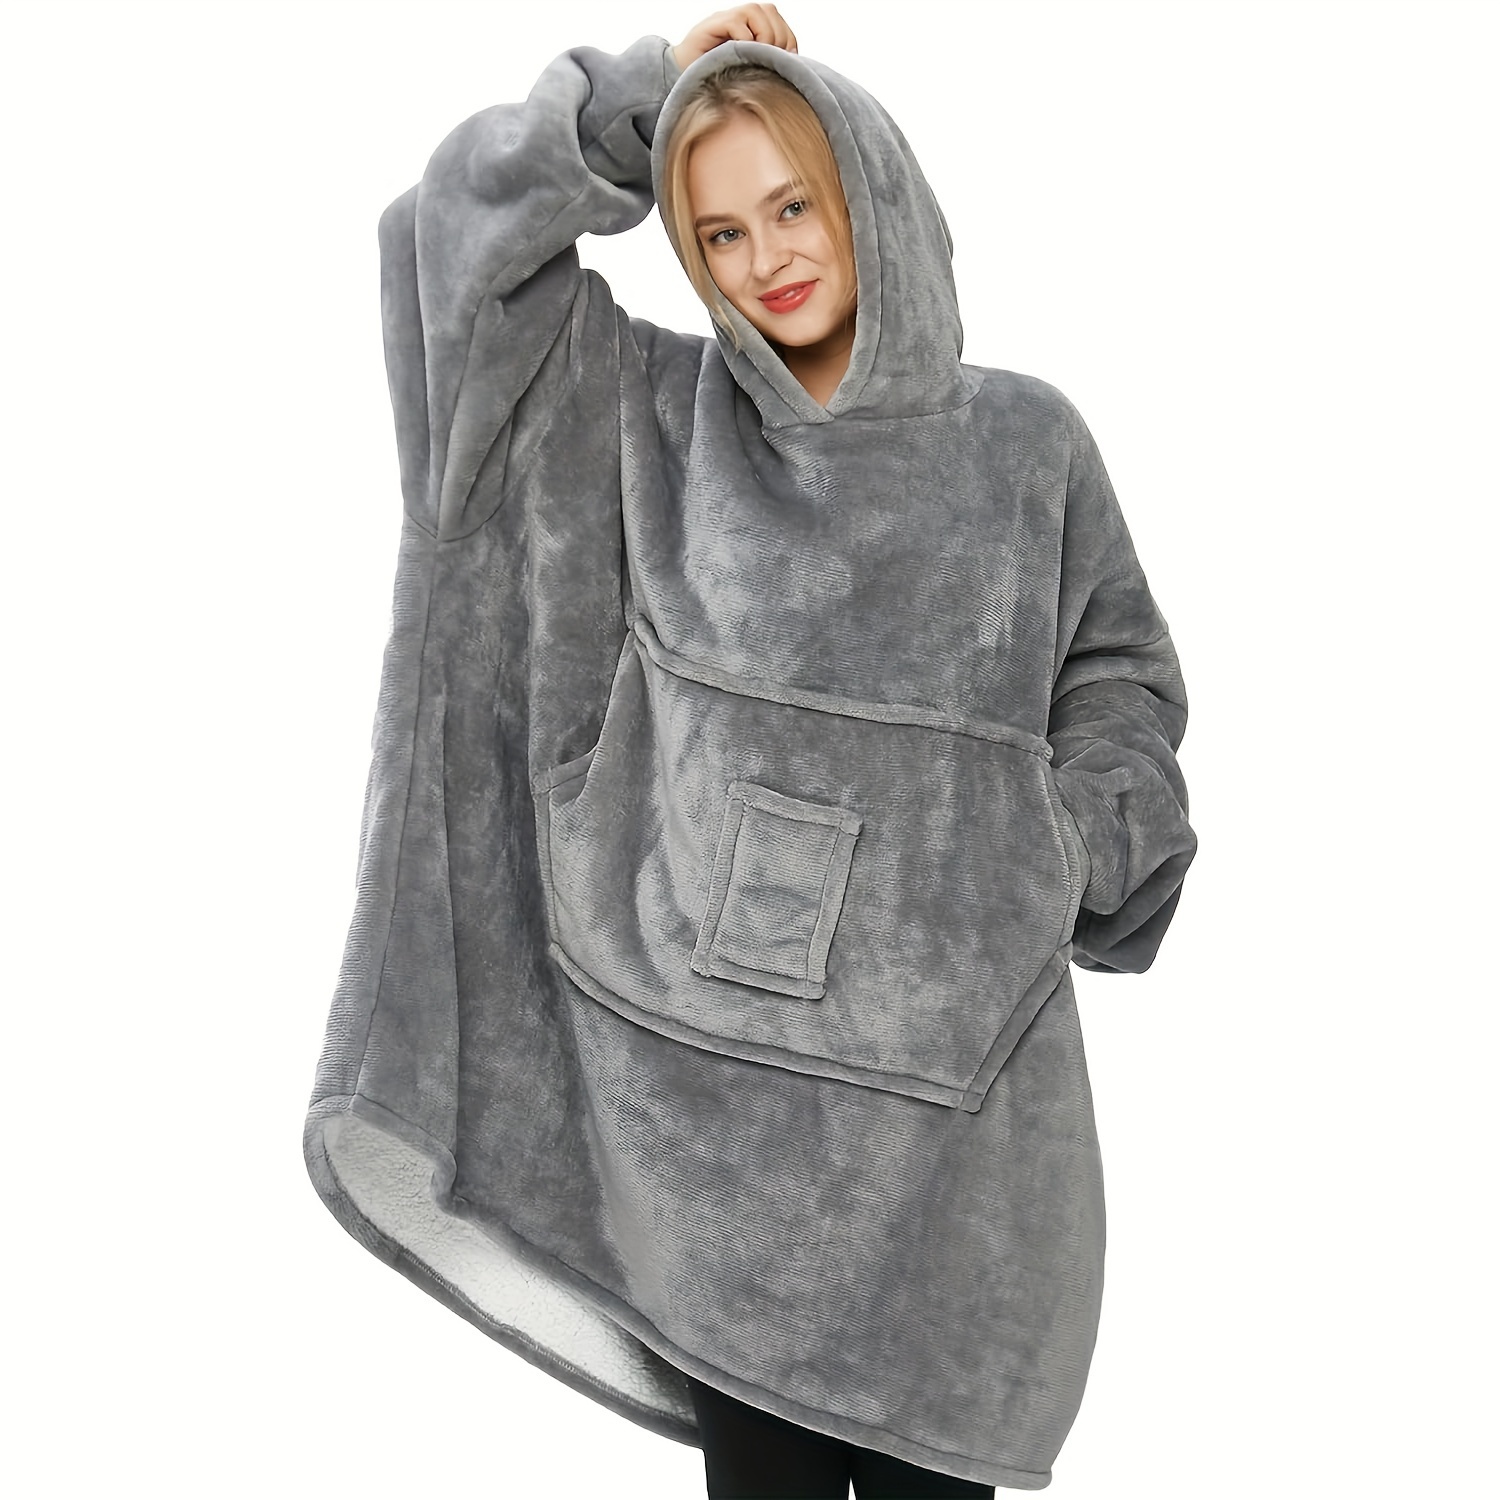 COZY VELOUR HOODED BLANKET w/SHERPA LINING 40 - Oxford Mills Home